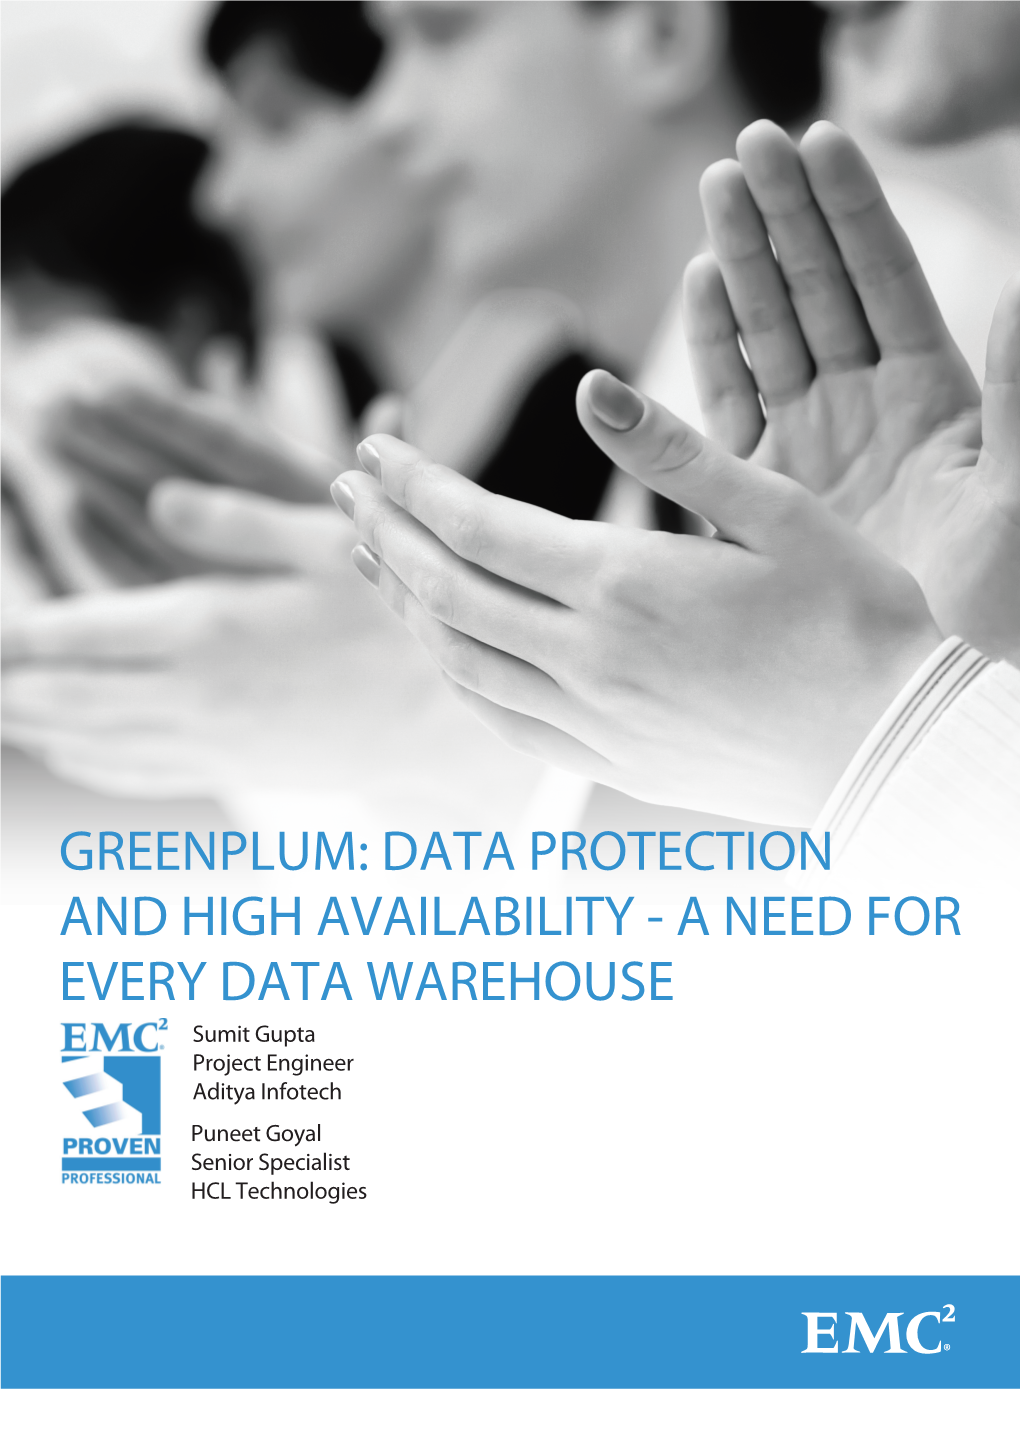 Greenplum: Data Protection and High Availability